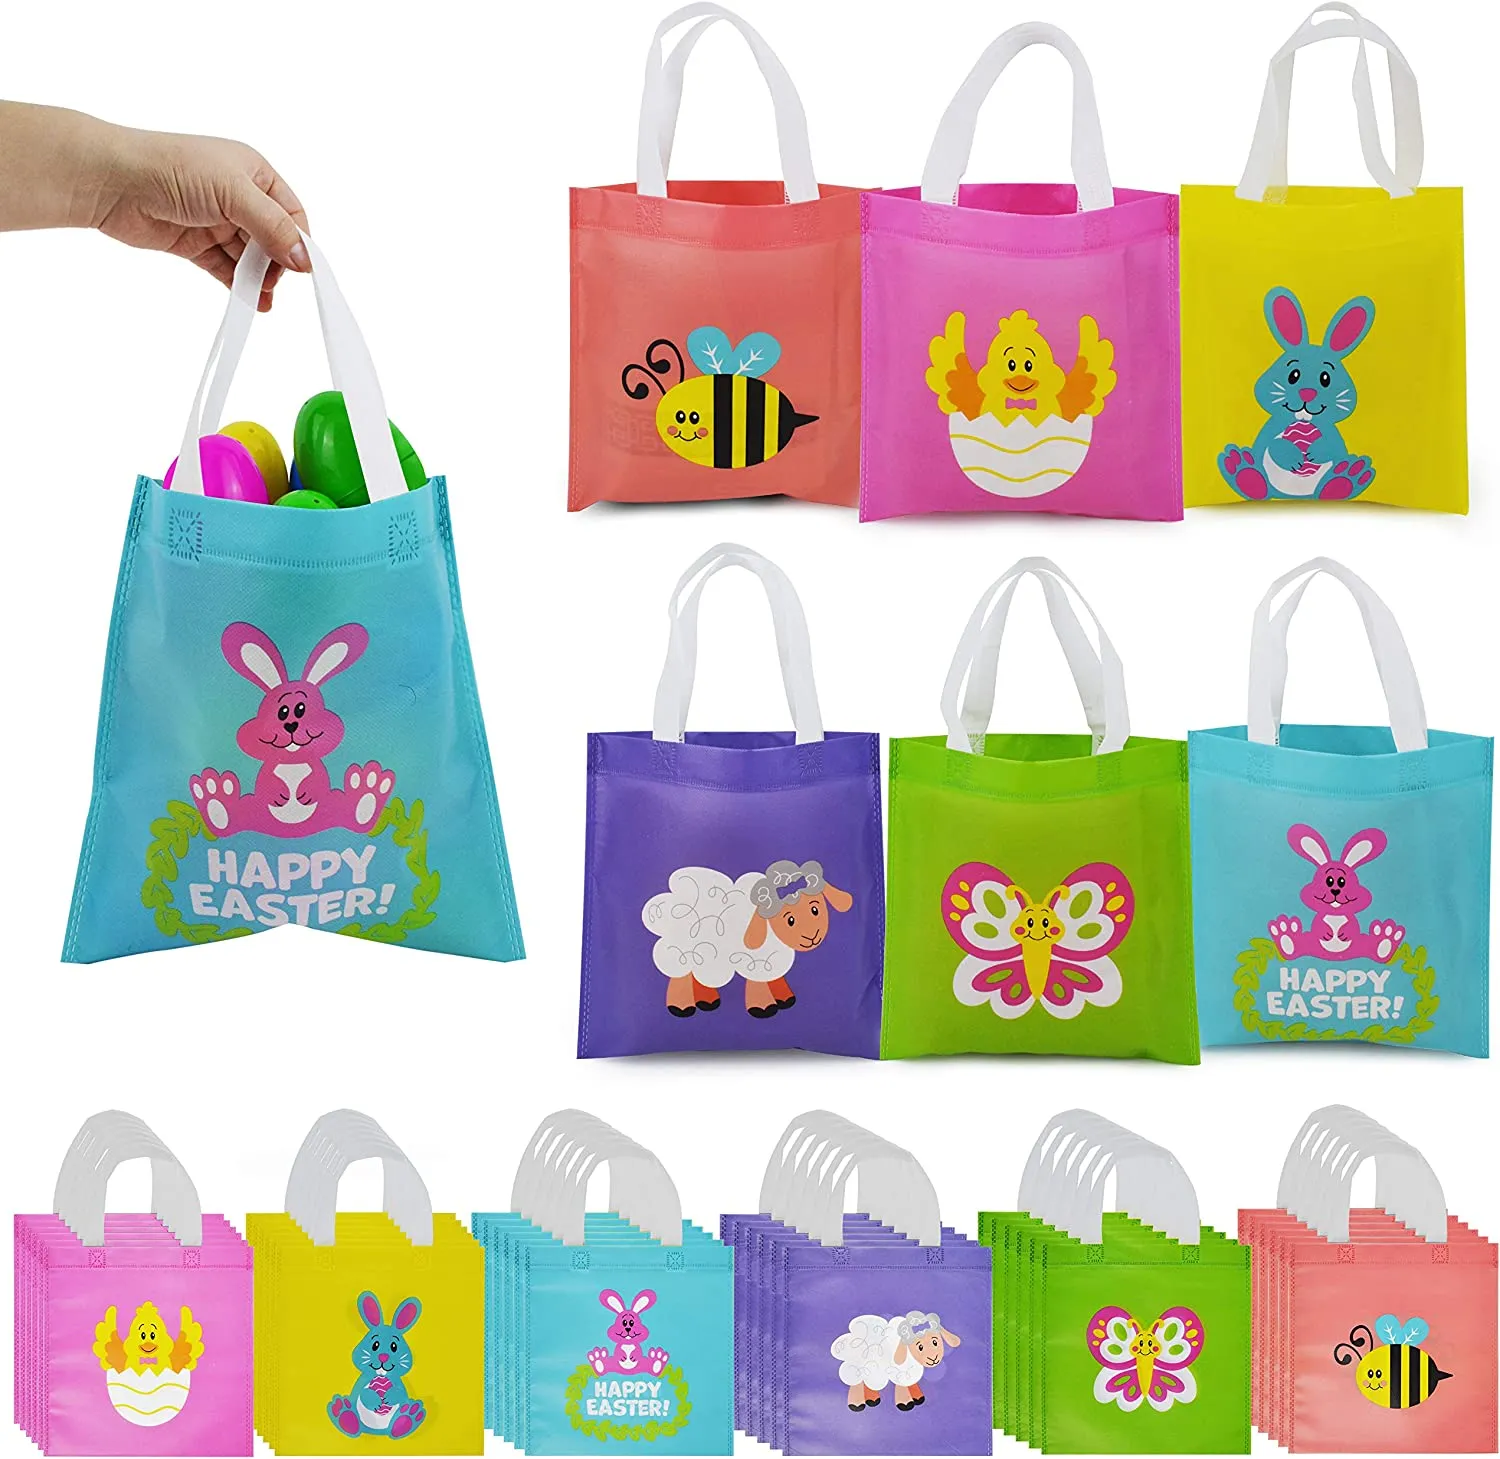 You are currently viewing Cool and Special Ideas for Easter Gift Baskets